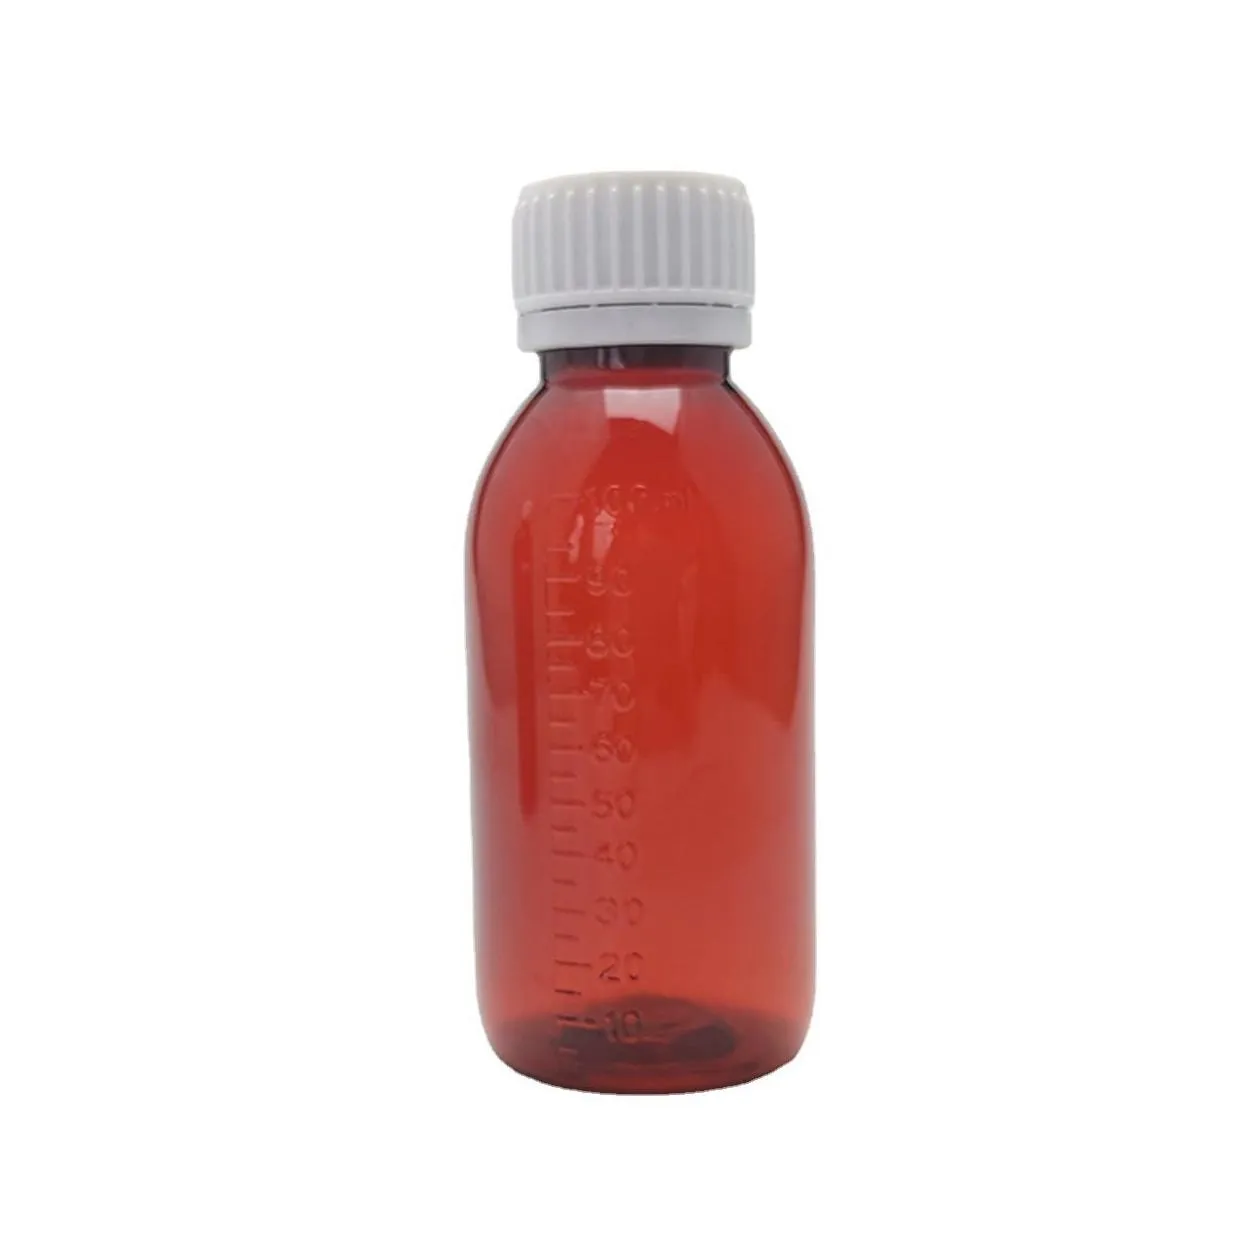 empty thclean syrup bottle 1000mg 100ml infused syrup brown 100ml bottles